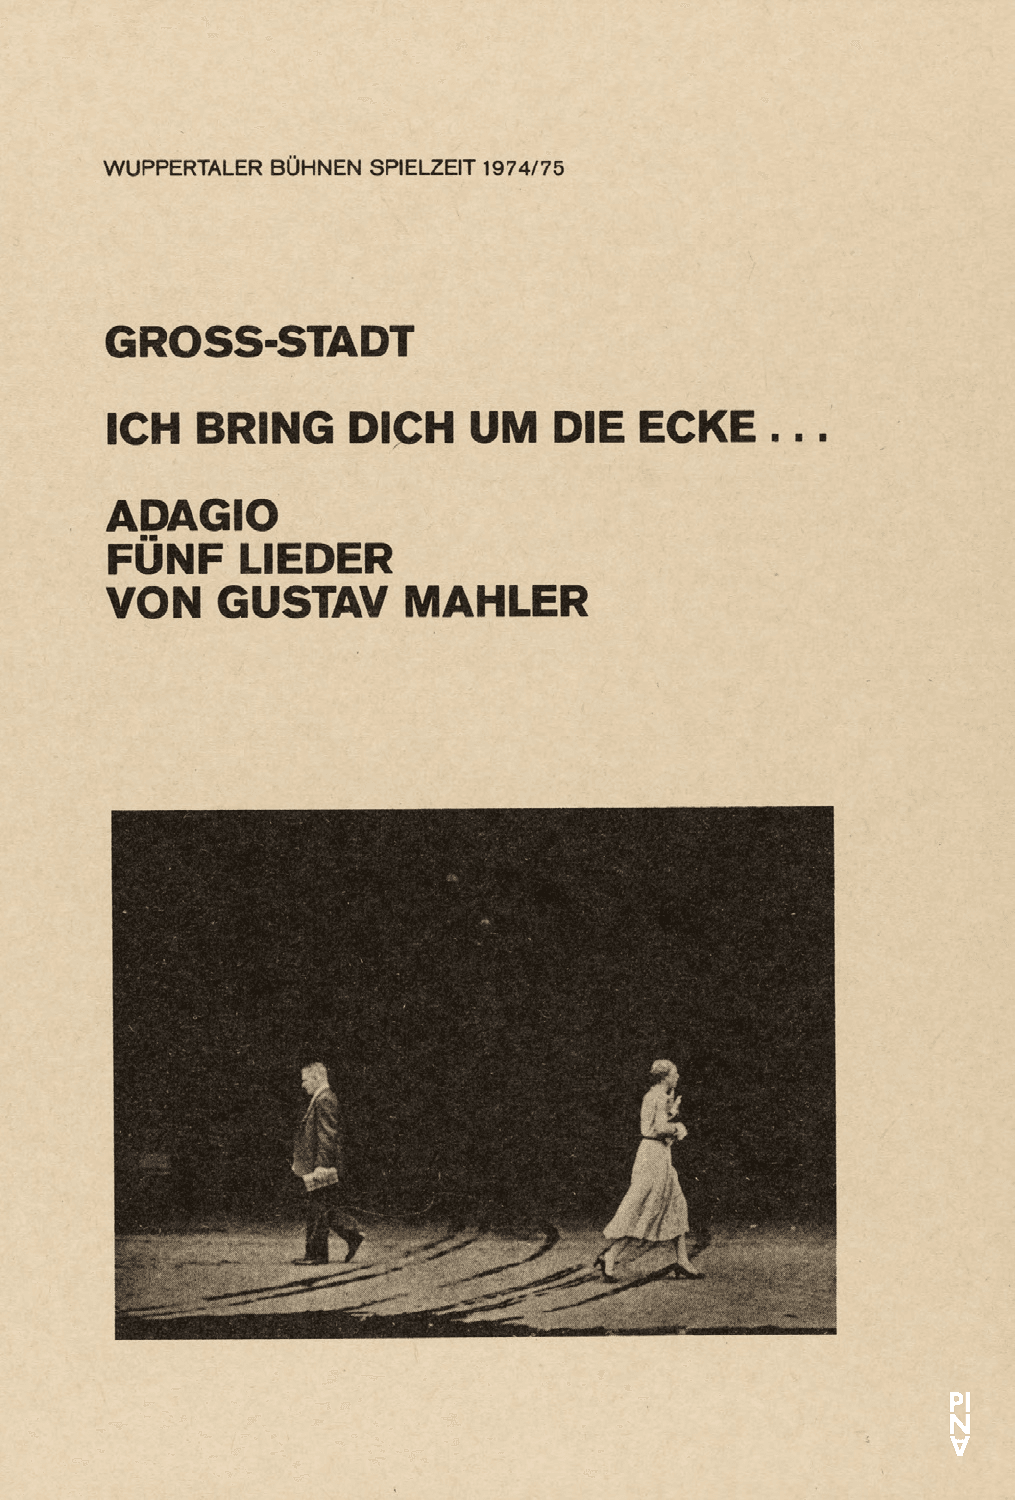 Booklet for “Adagio – Five Songs by Gustav Mahler” and “I'll Do You In…” by Pina Bausch with Tanztheater Wuppertal and “Gross-Stadt” by Kurt Jooss with Tanztheater Wuppertal in in Wuppertal, Dec. 8, 1974